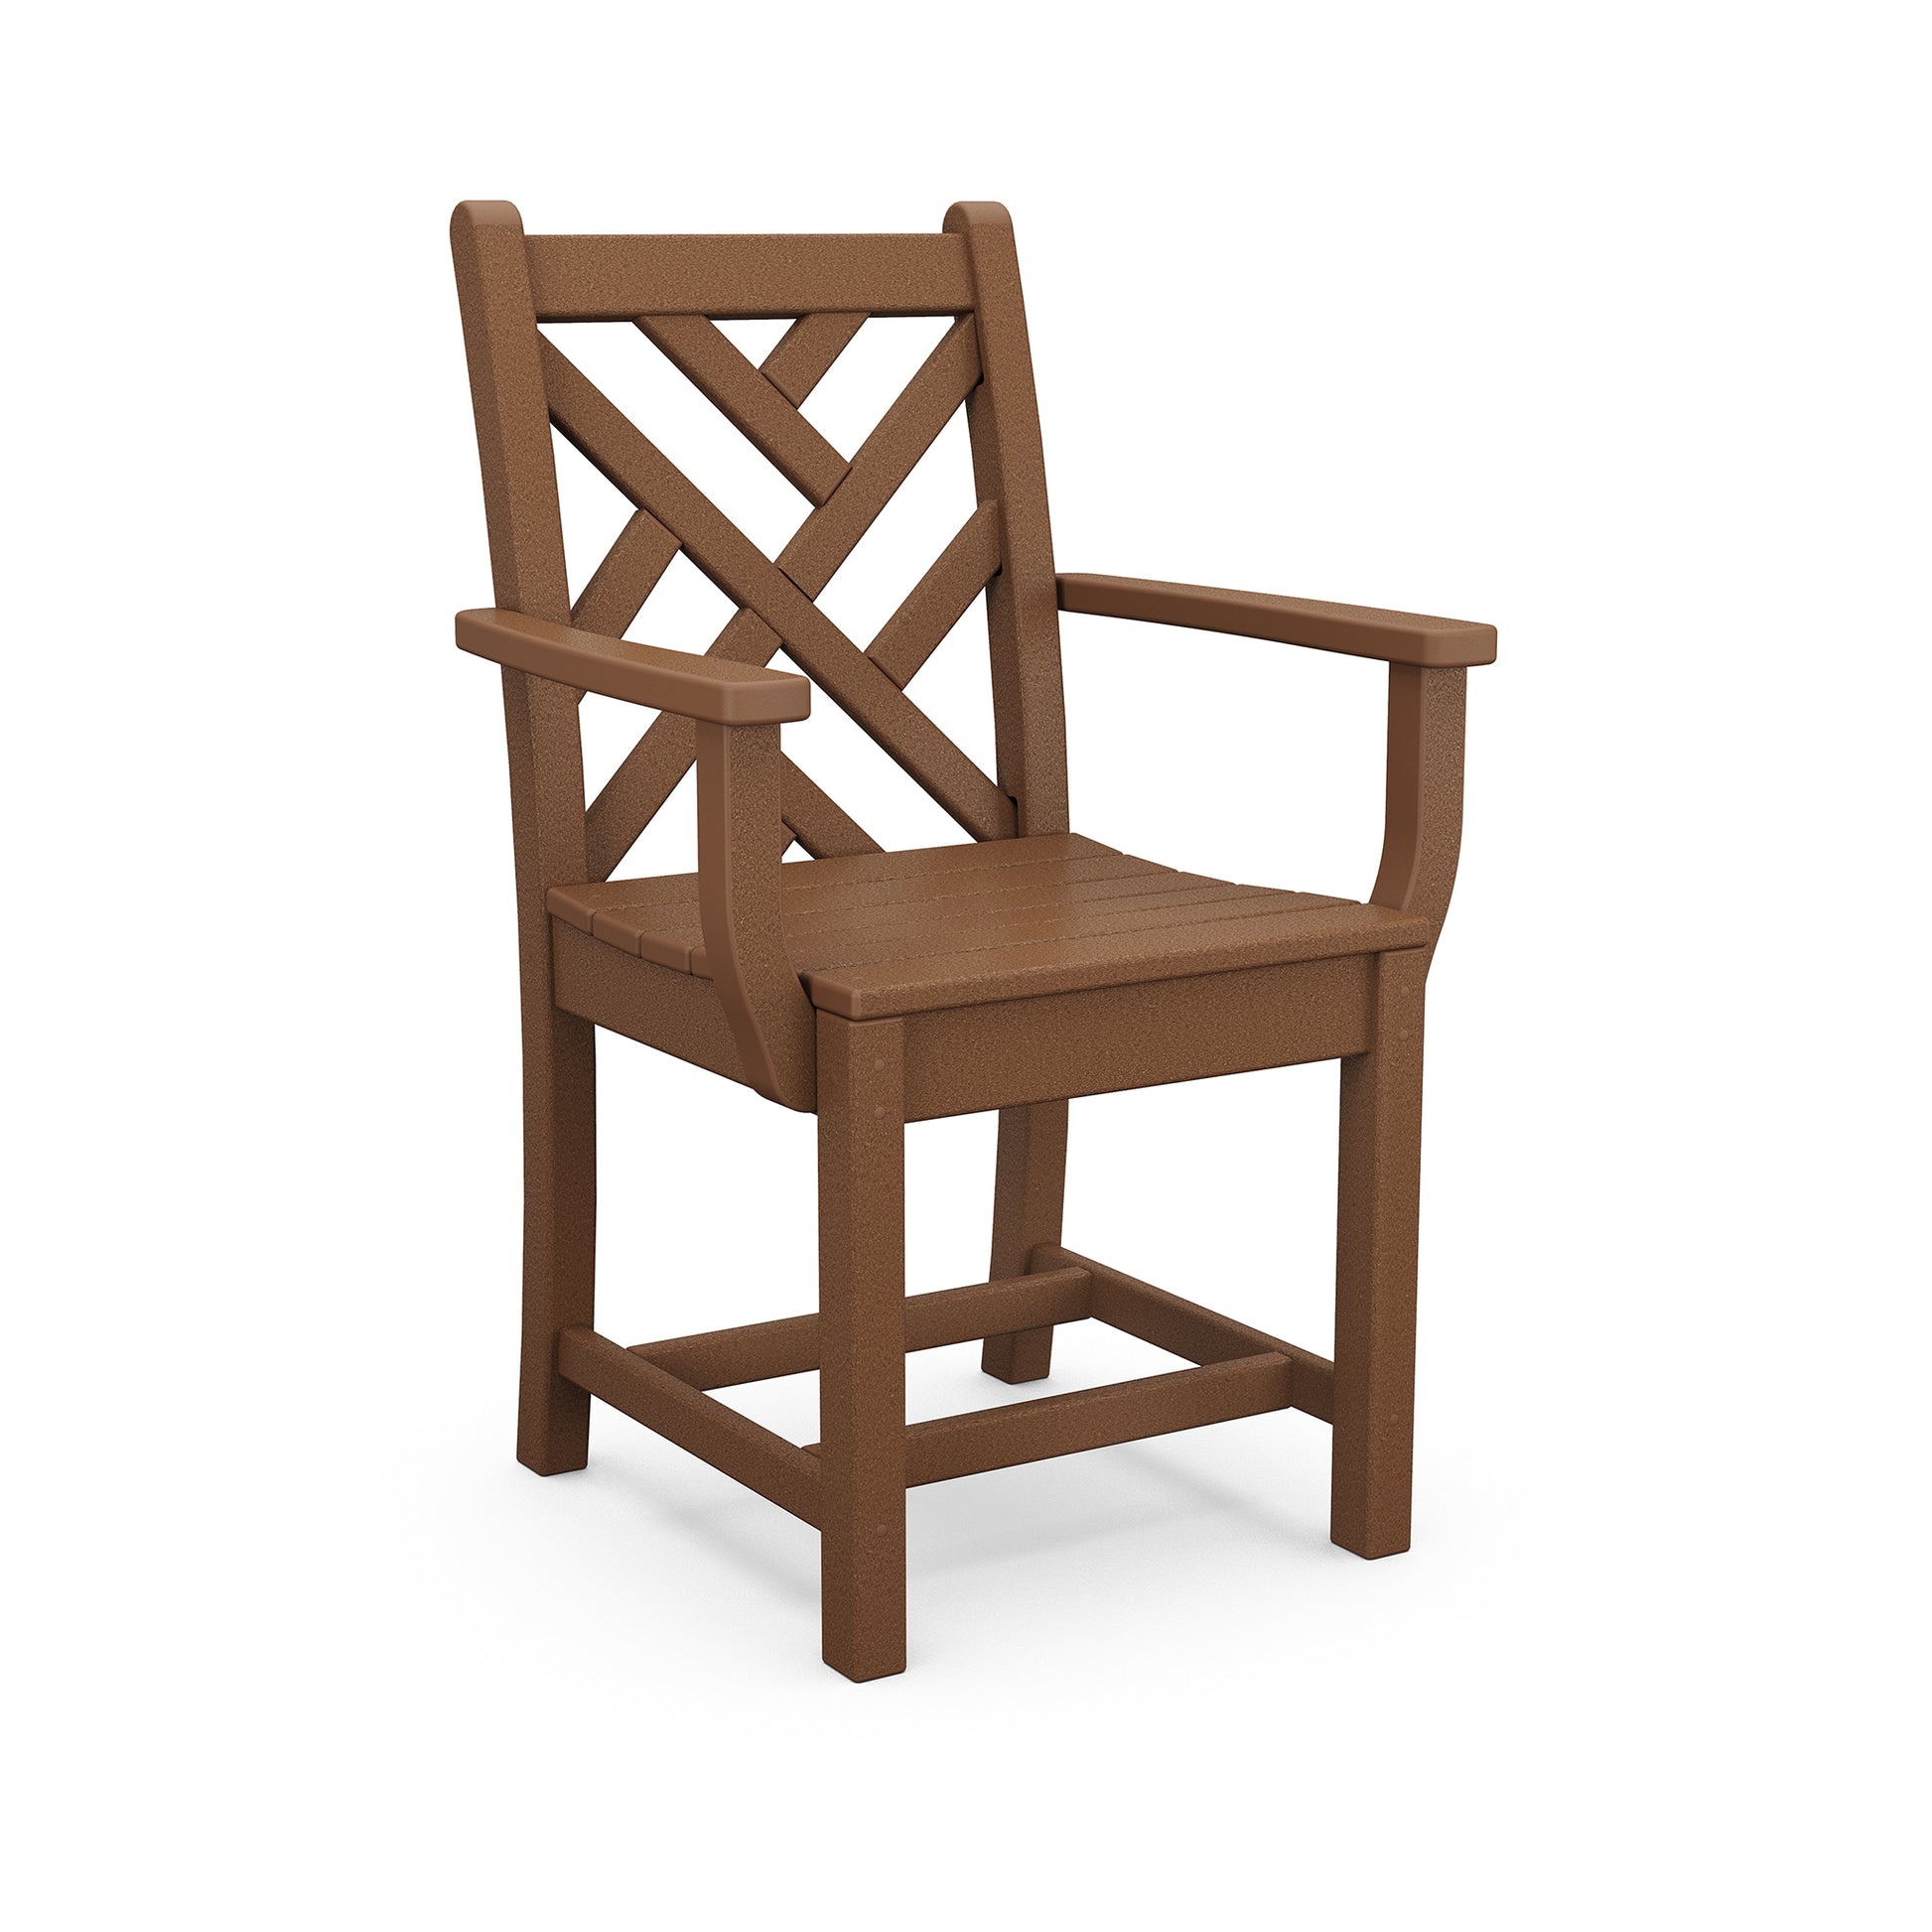 A brown POLYWOOD® Chippendale outdoor dining arm chair with a tall backrest featuring criss-cross lattice design, armrests, and four legs. The chair is viewed on a white background.